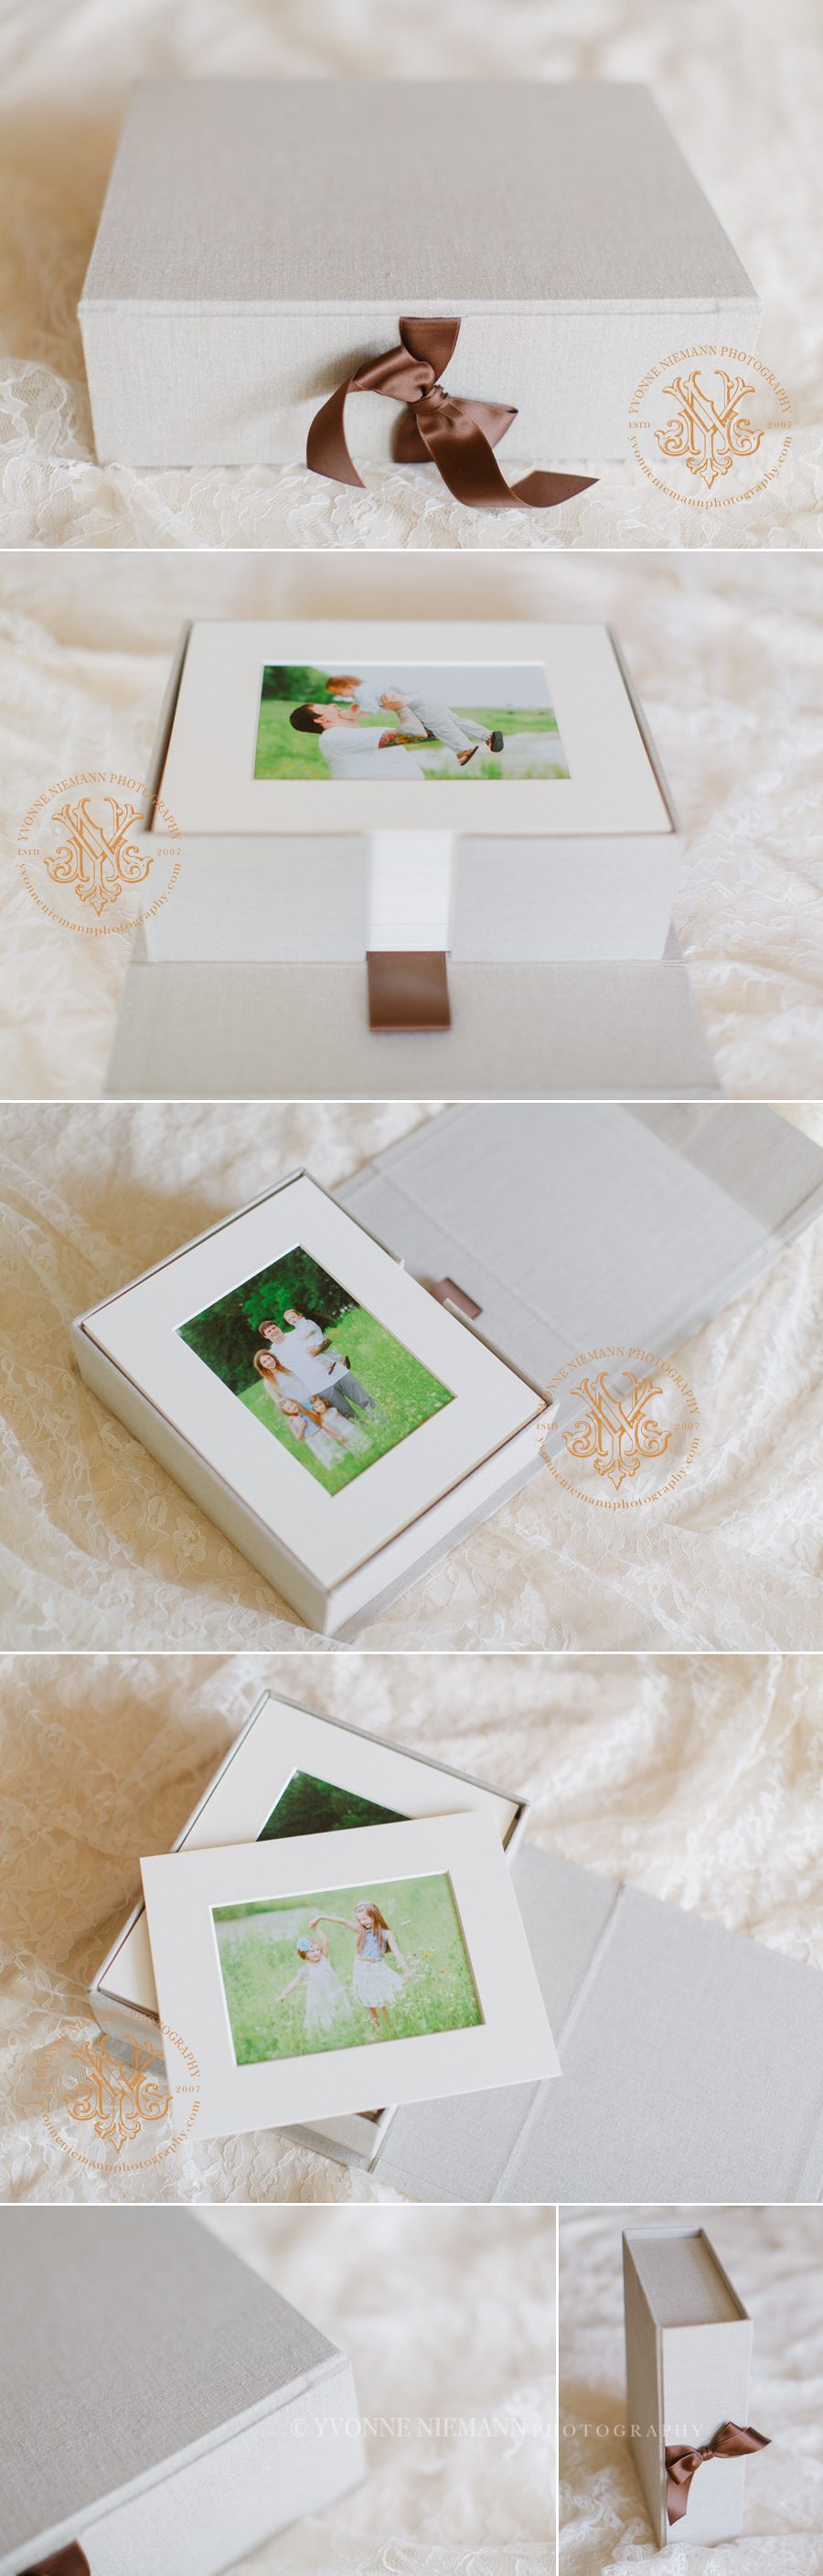 Fine art image box offered by Athens, GA family photographer, Yvonne Niemann Photography.